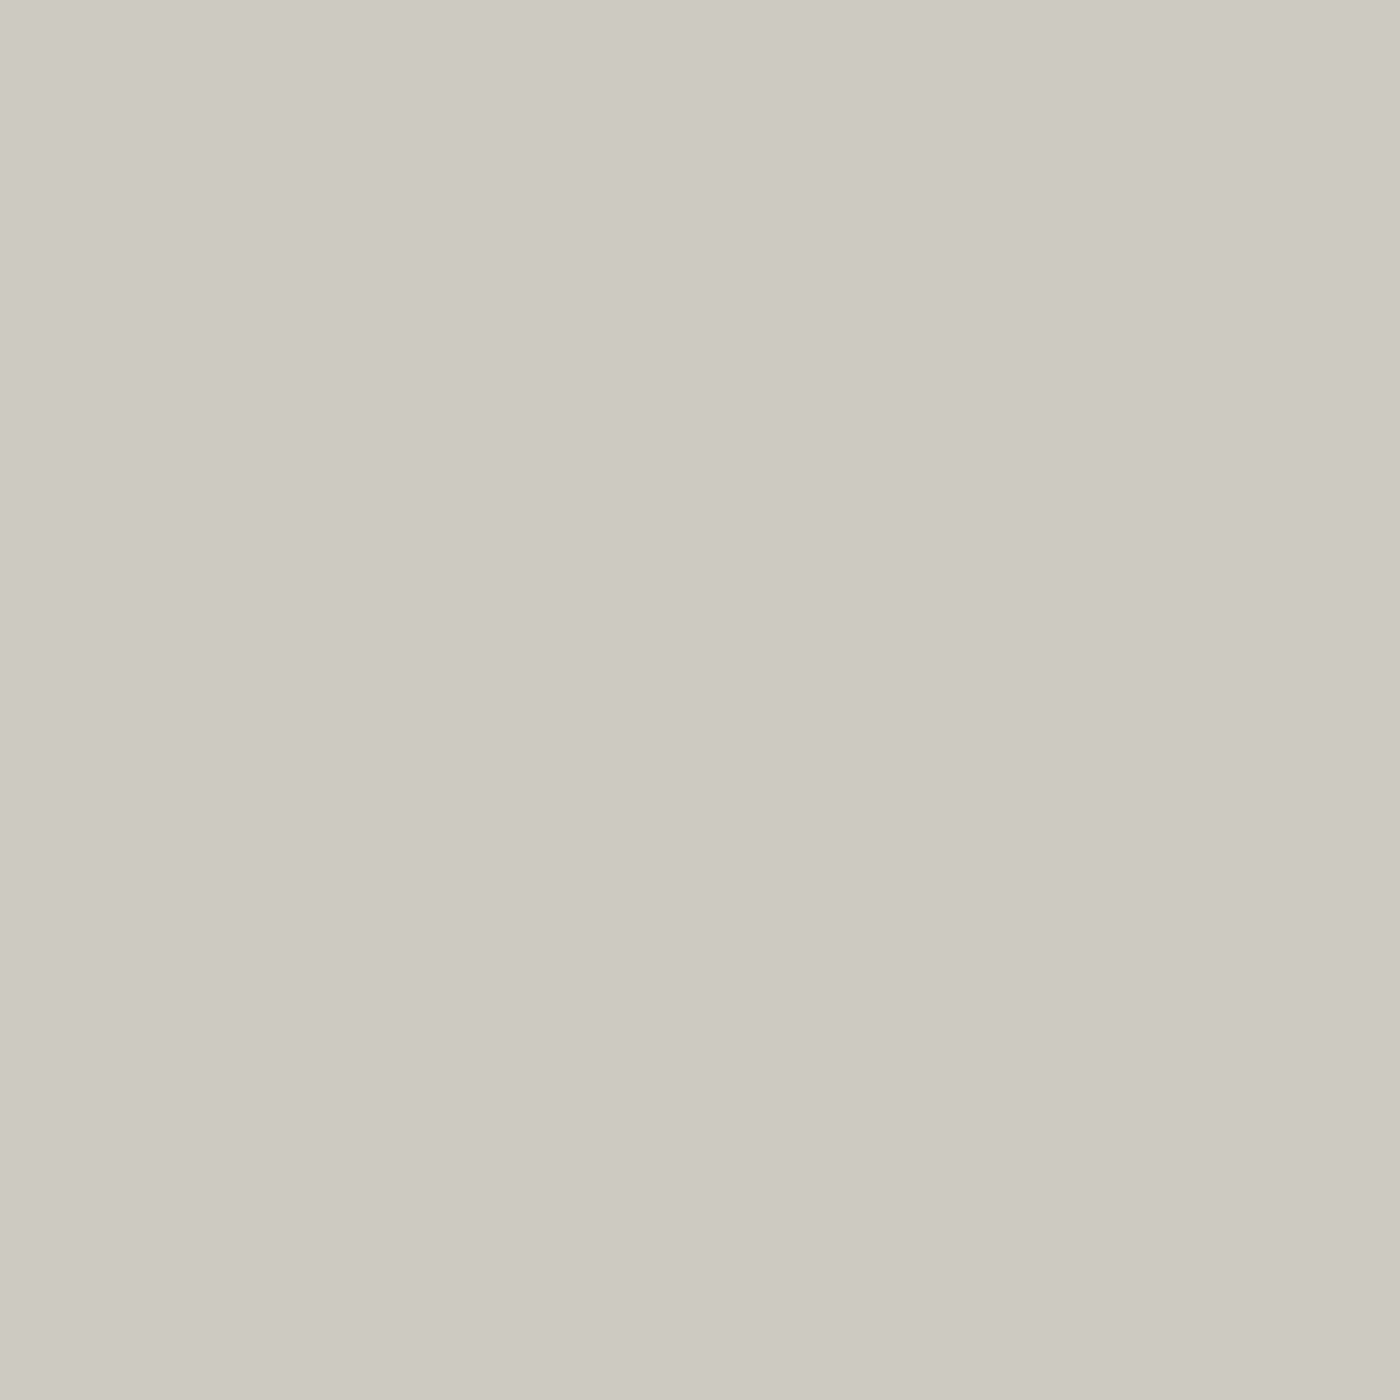 TWILL 12x12 Smooth Cardstock - Bazzill Smoothies Collection - smoky gray color